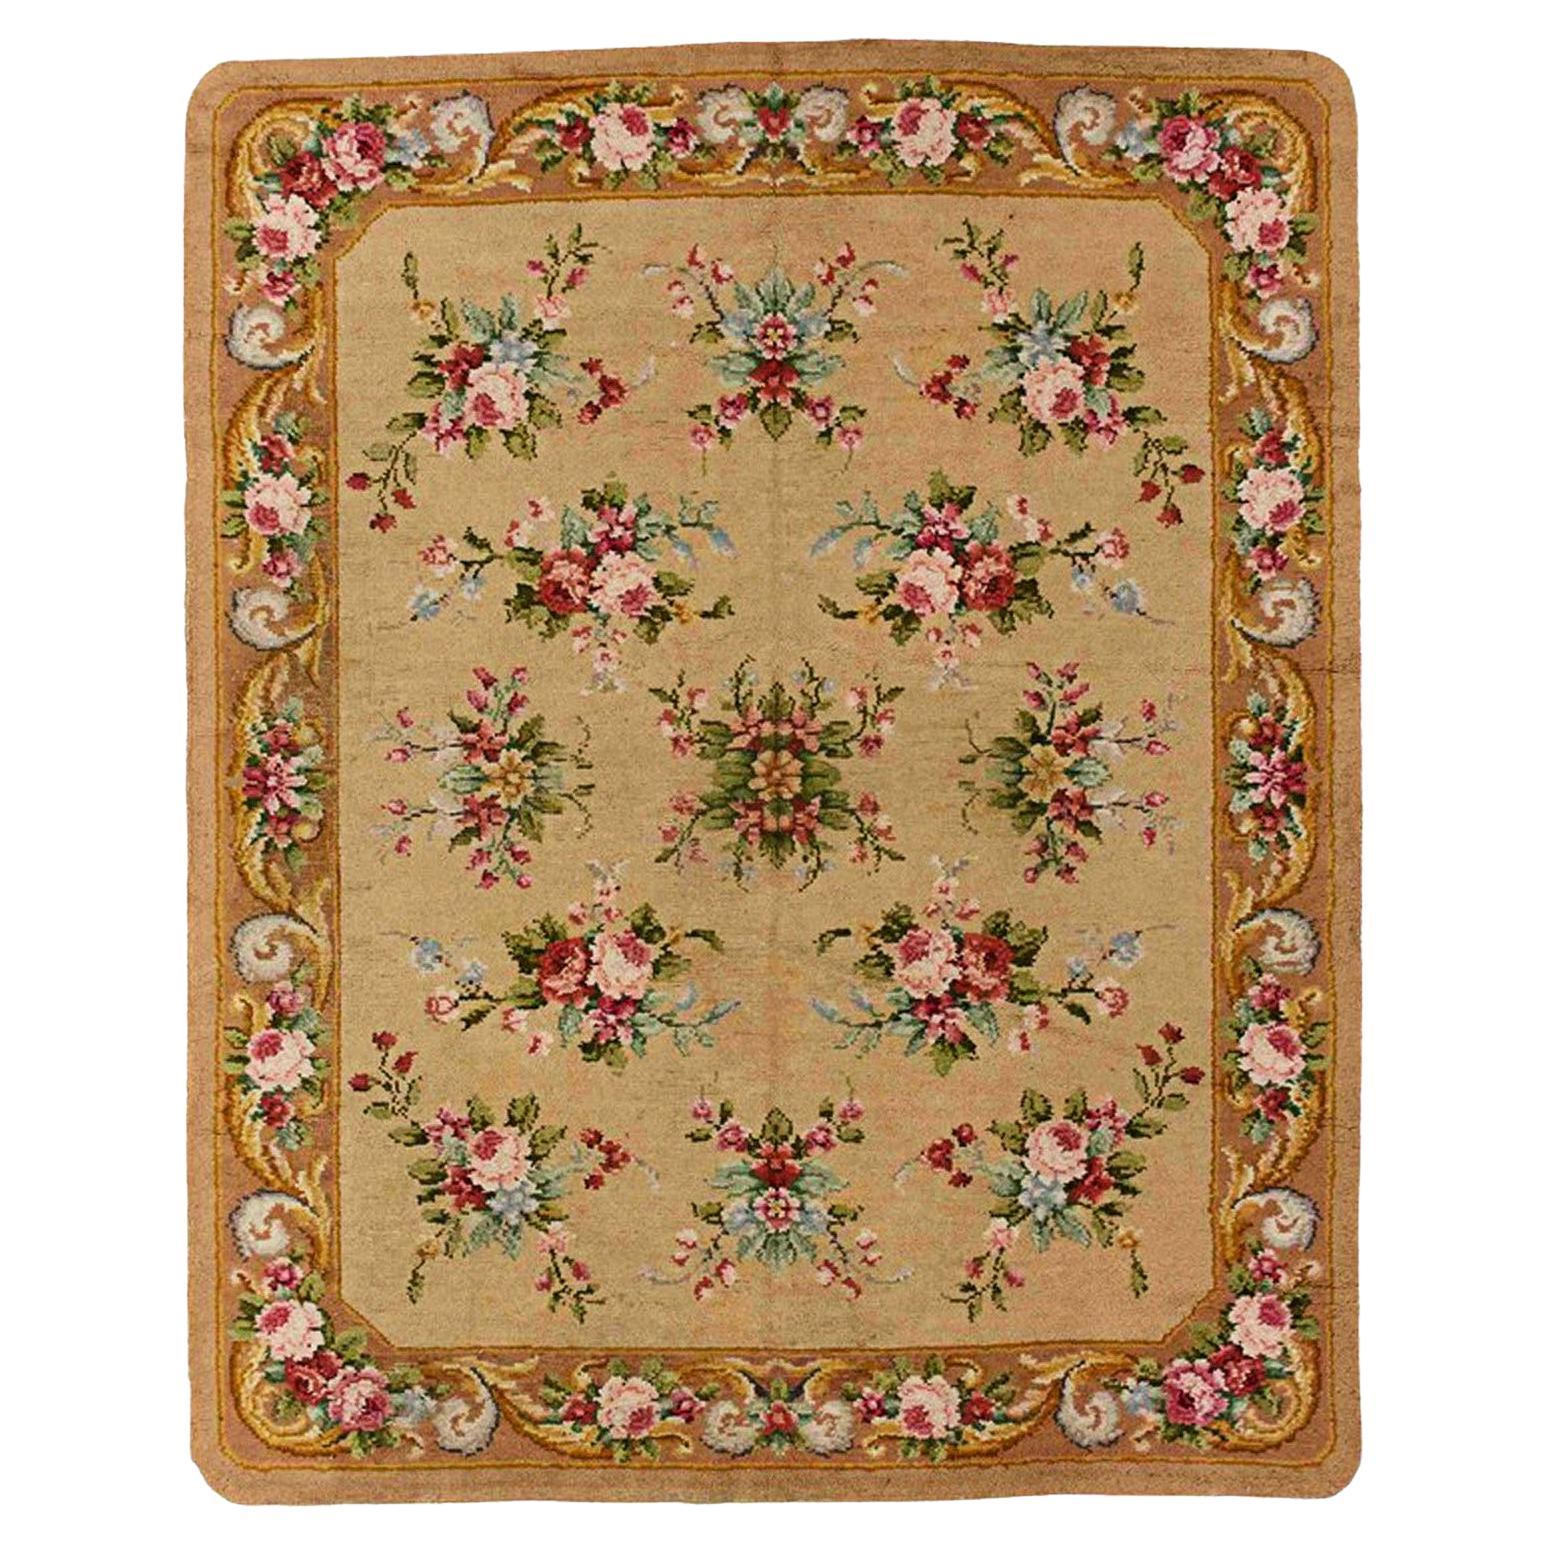 20th Century, Brown and Floreal Motifs Savonerie French Rug, ca 1920